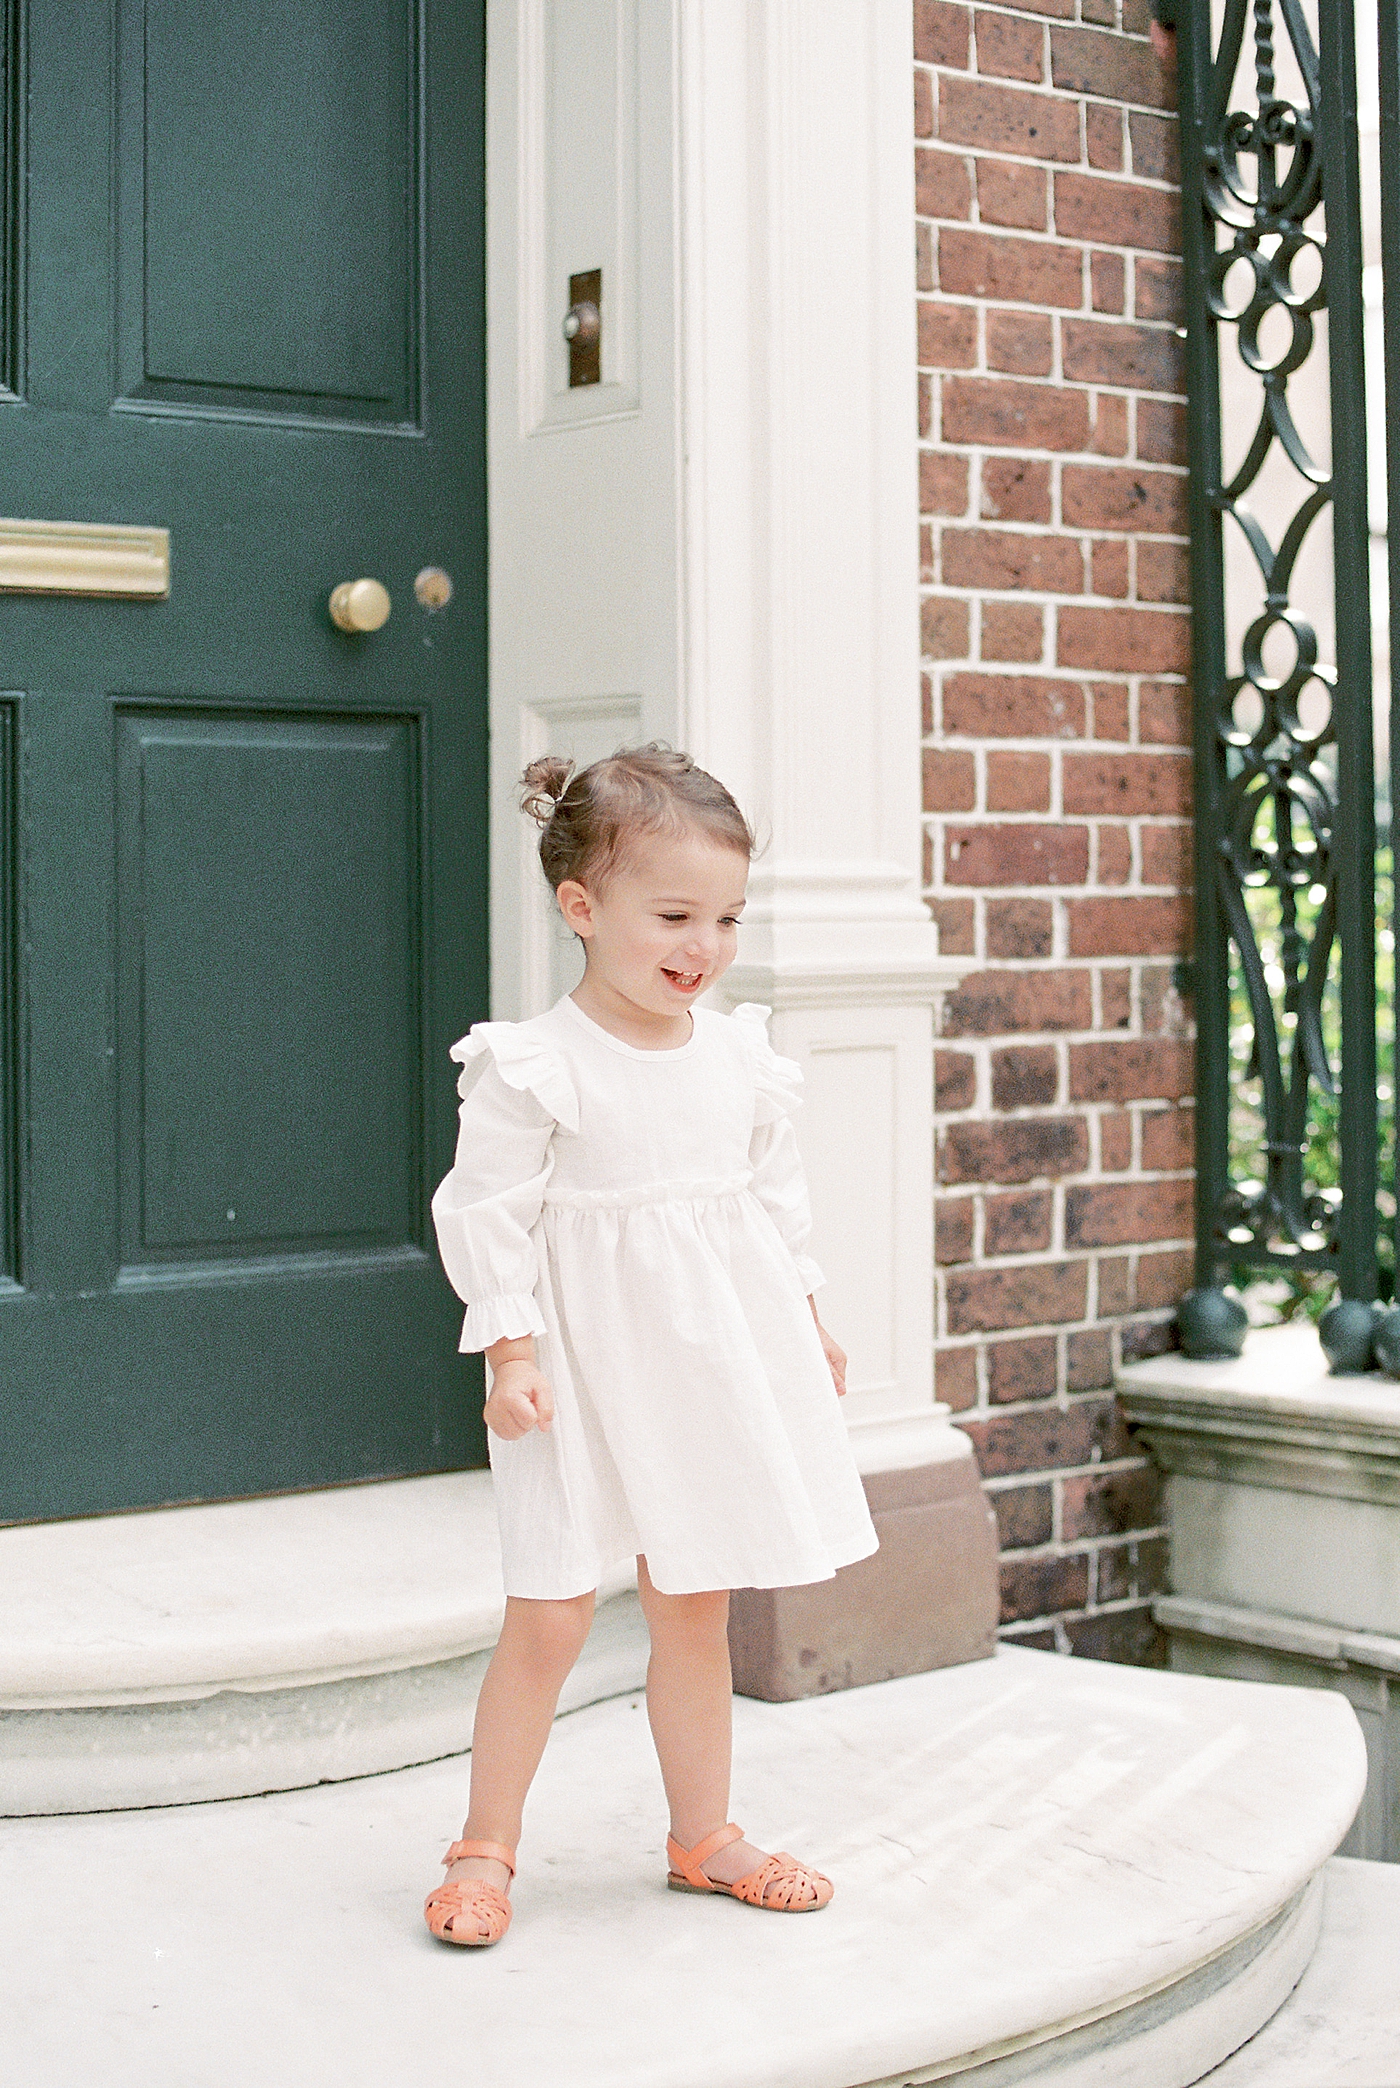 Little girl in white dress standing on a stoop | Photo by Caitlyn Motycka Photography